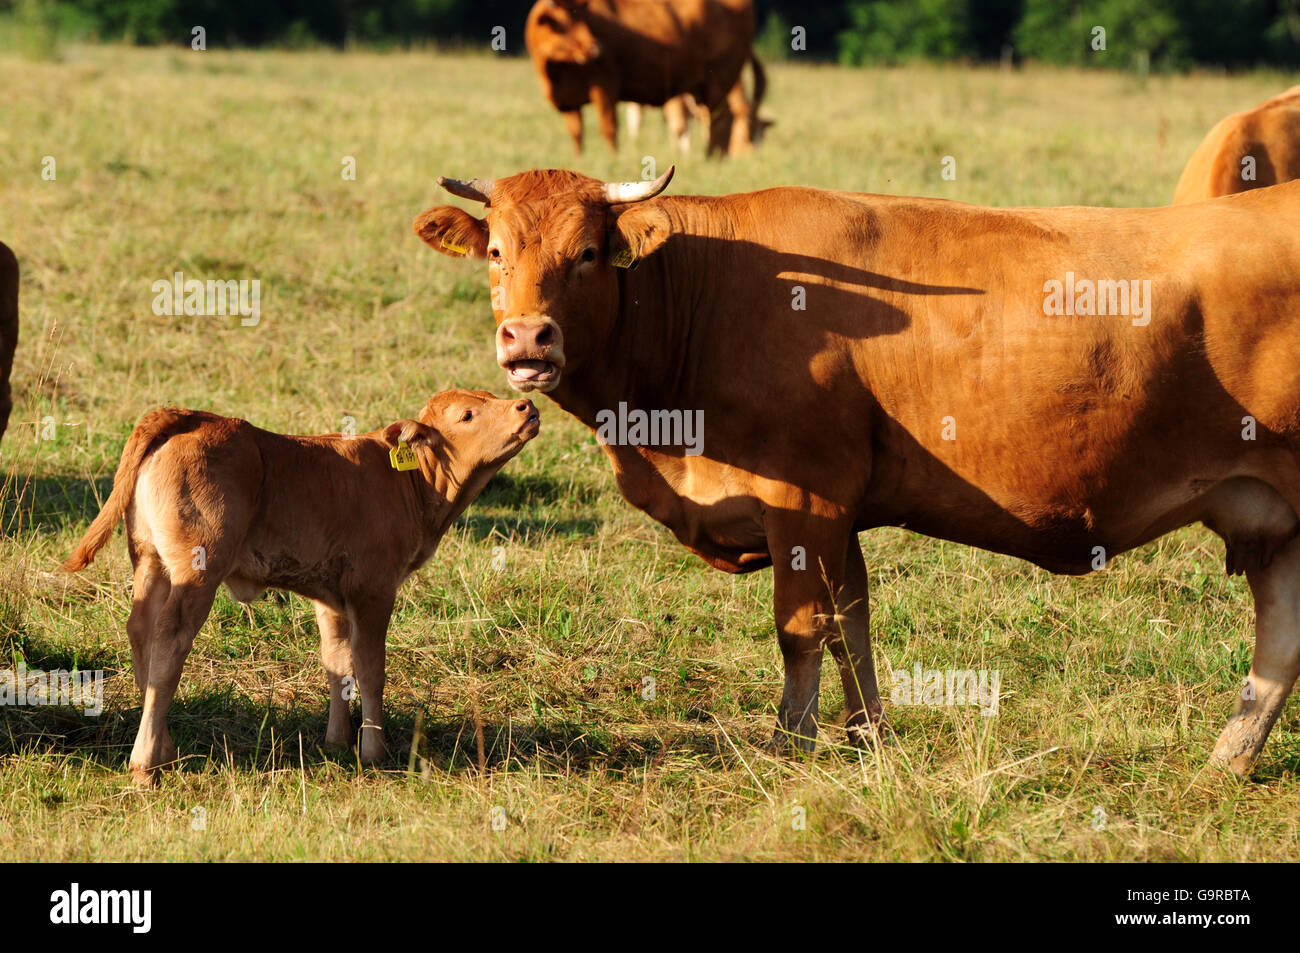 Limousin Cattle, cow with calf / suckler cow husbandry Stock Photo